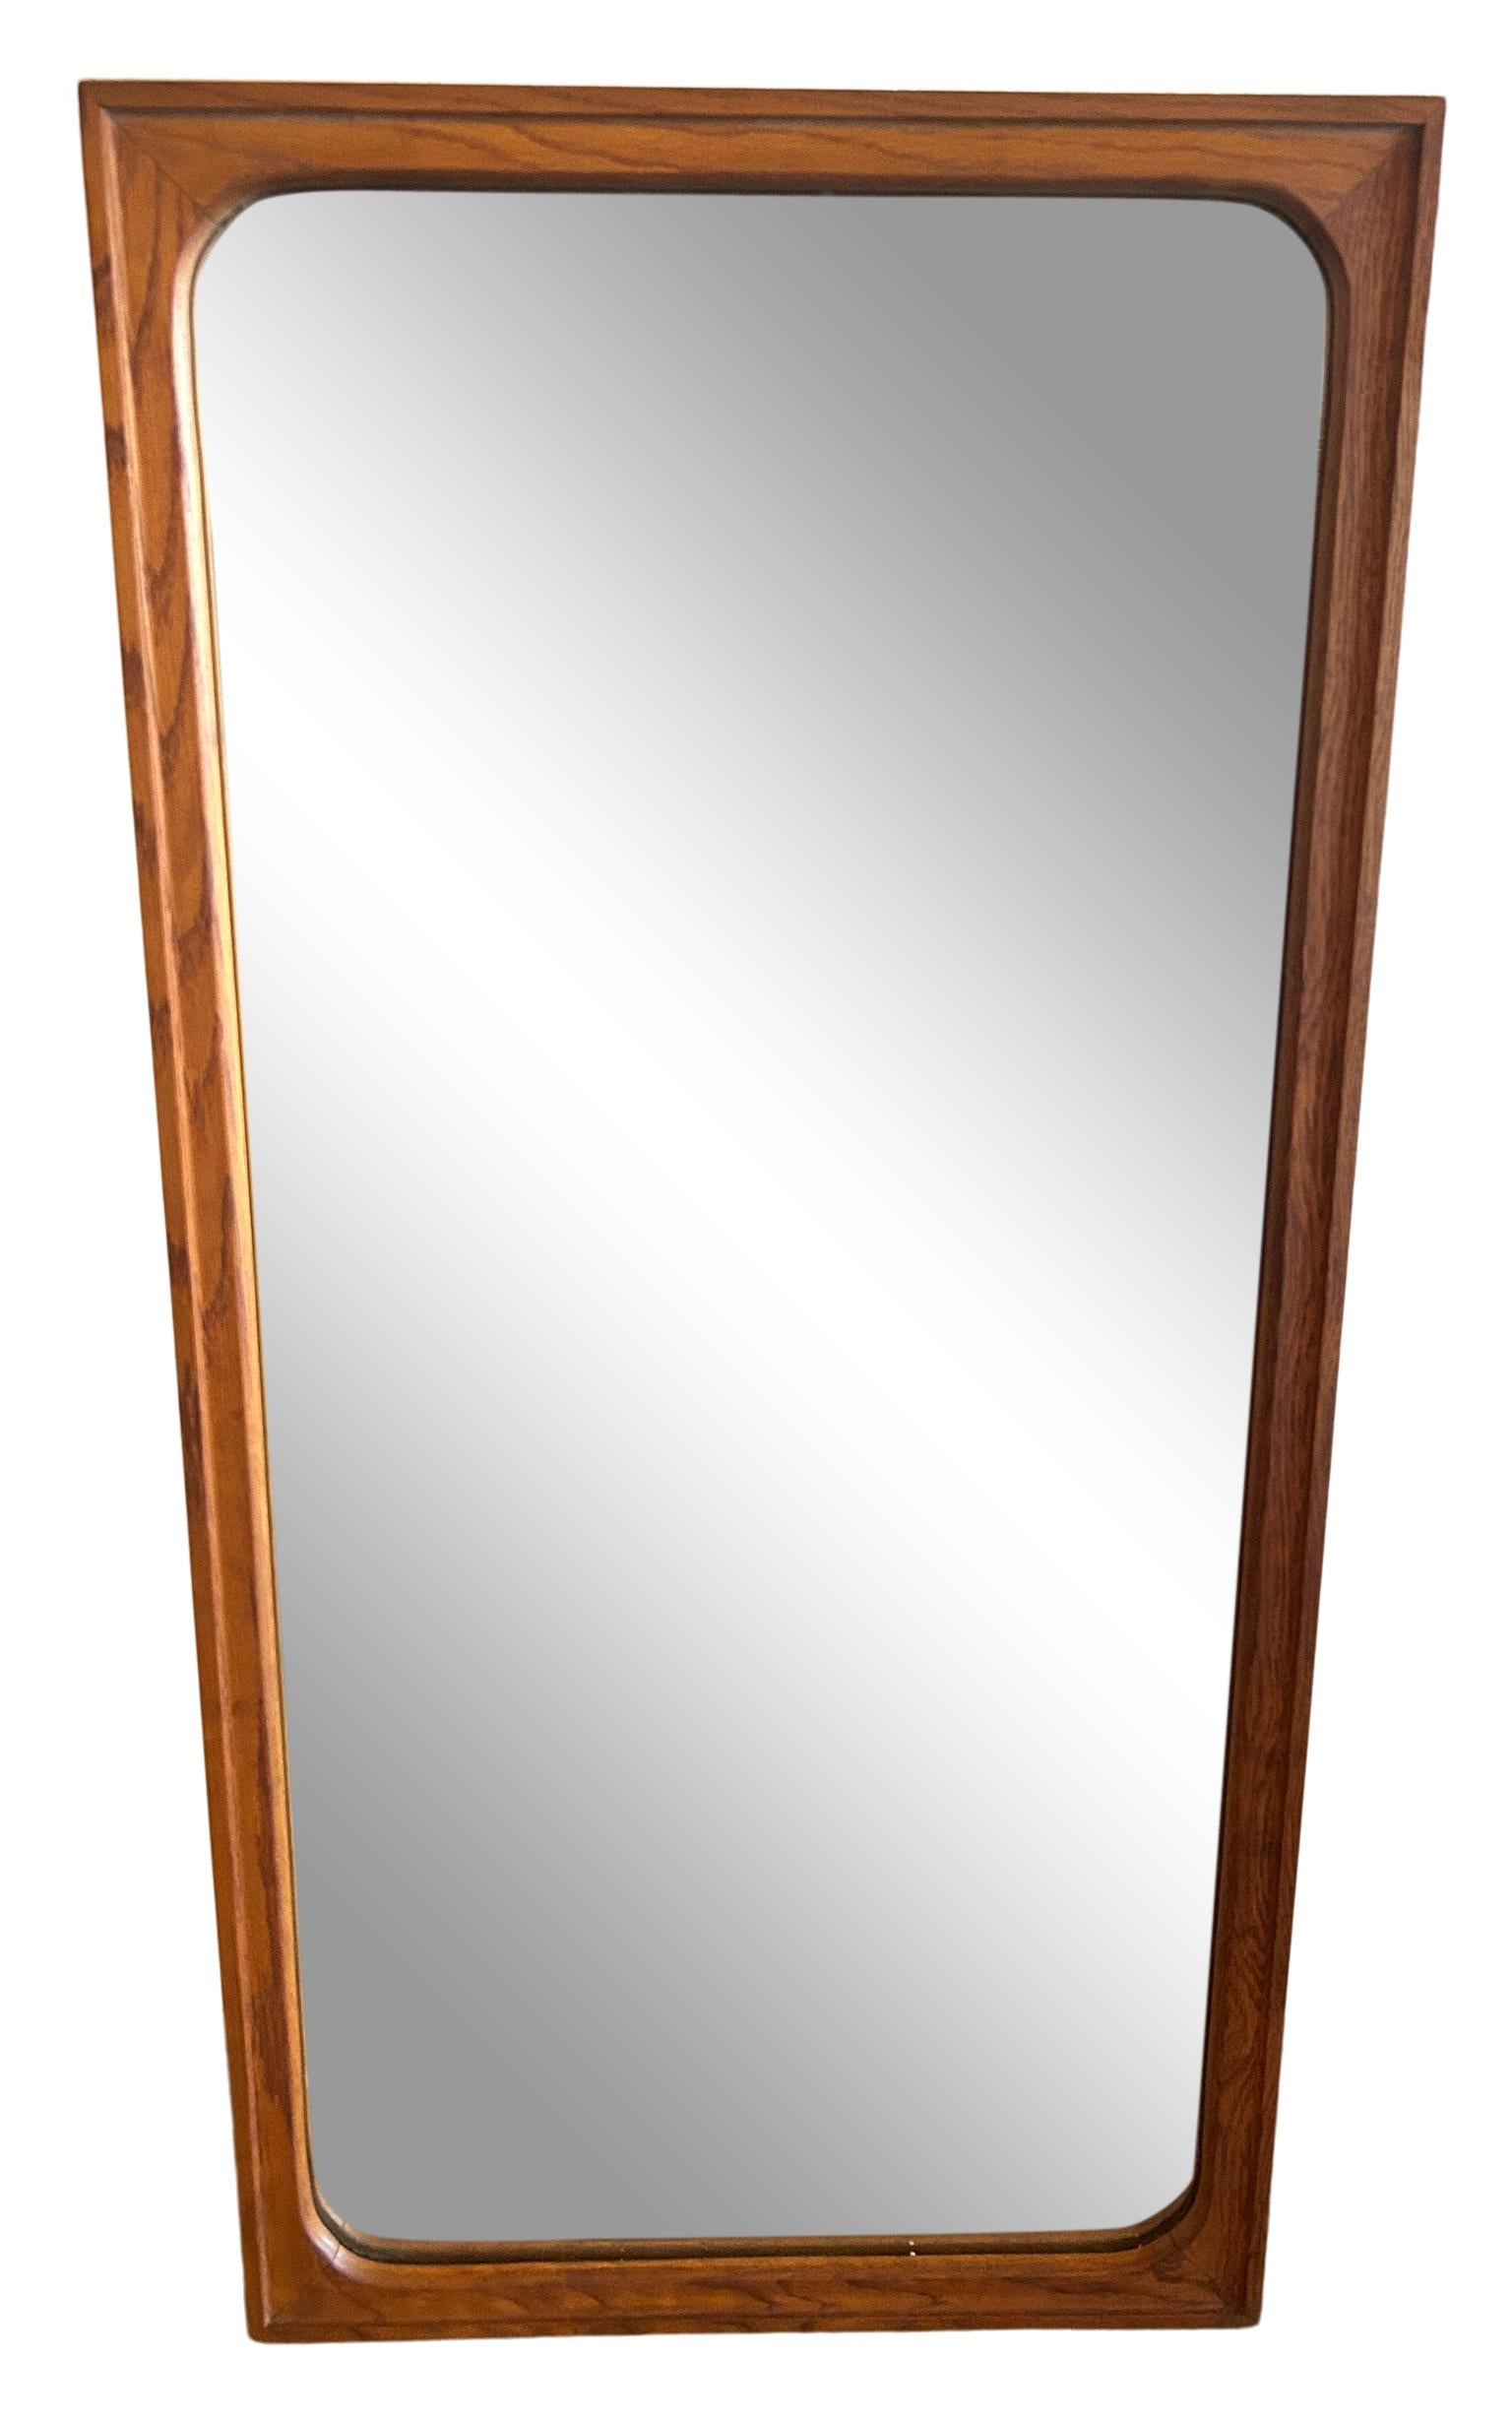 American Mid-Century Modern Solid Walnut Framed Wall Mirror with Curved Details